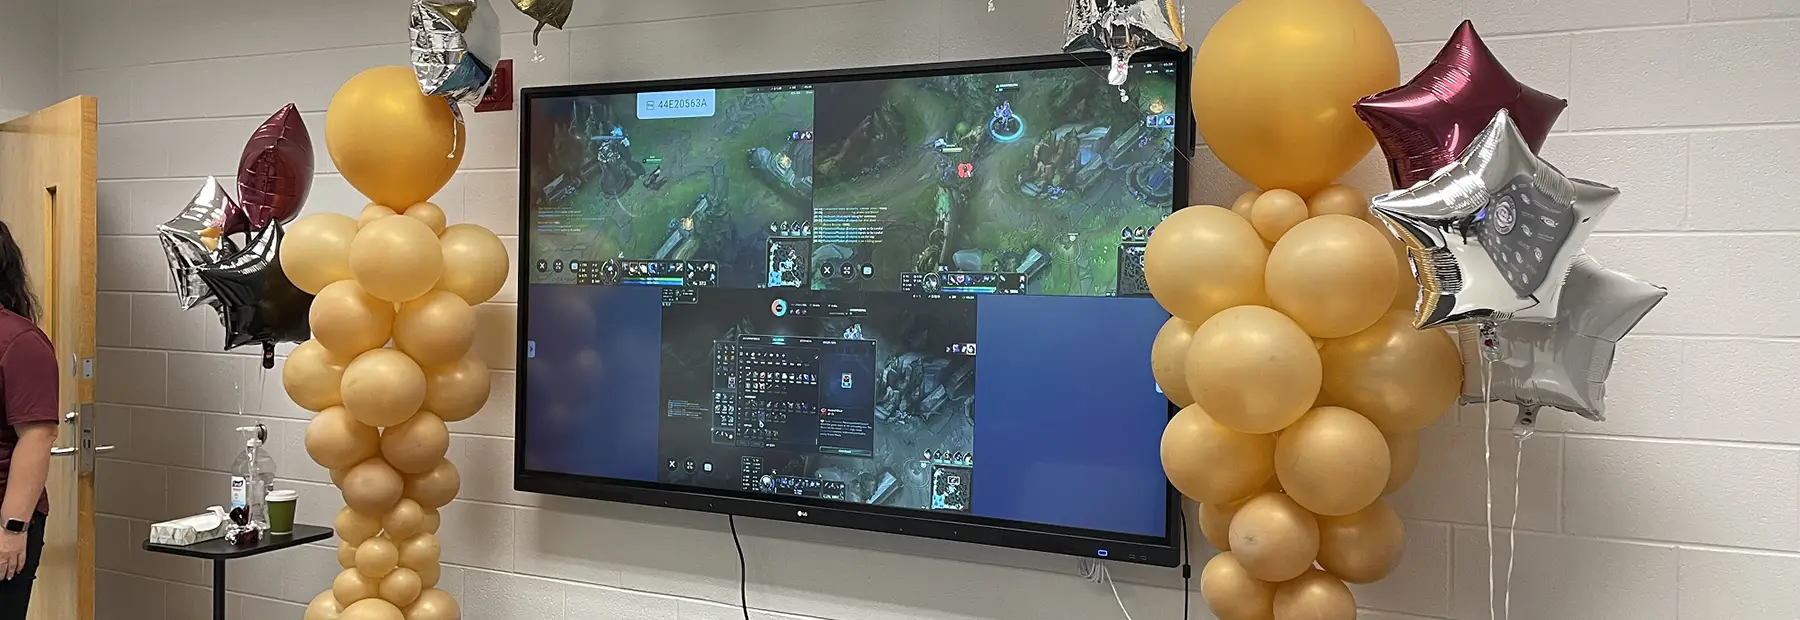 Large gaming display surrounded by balloons